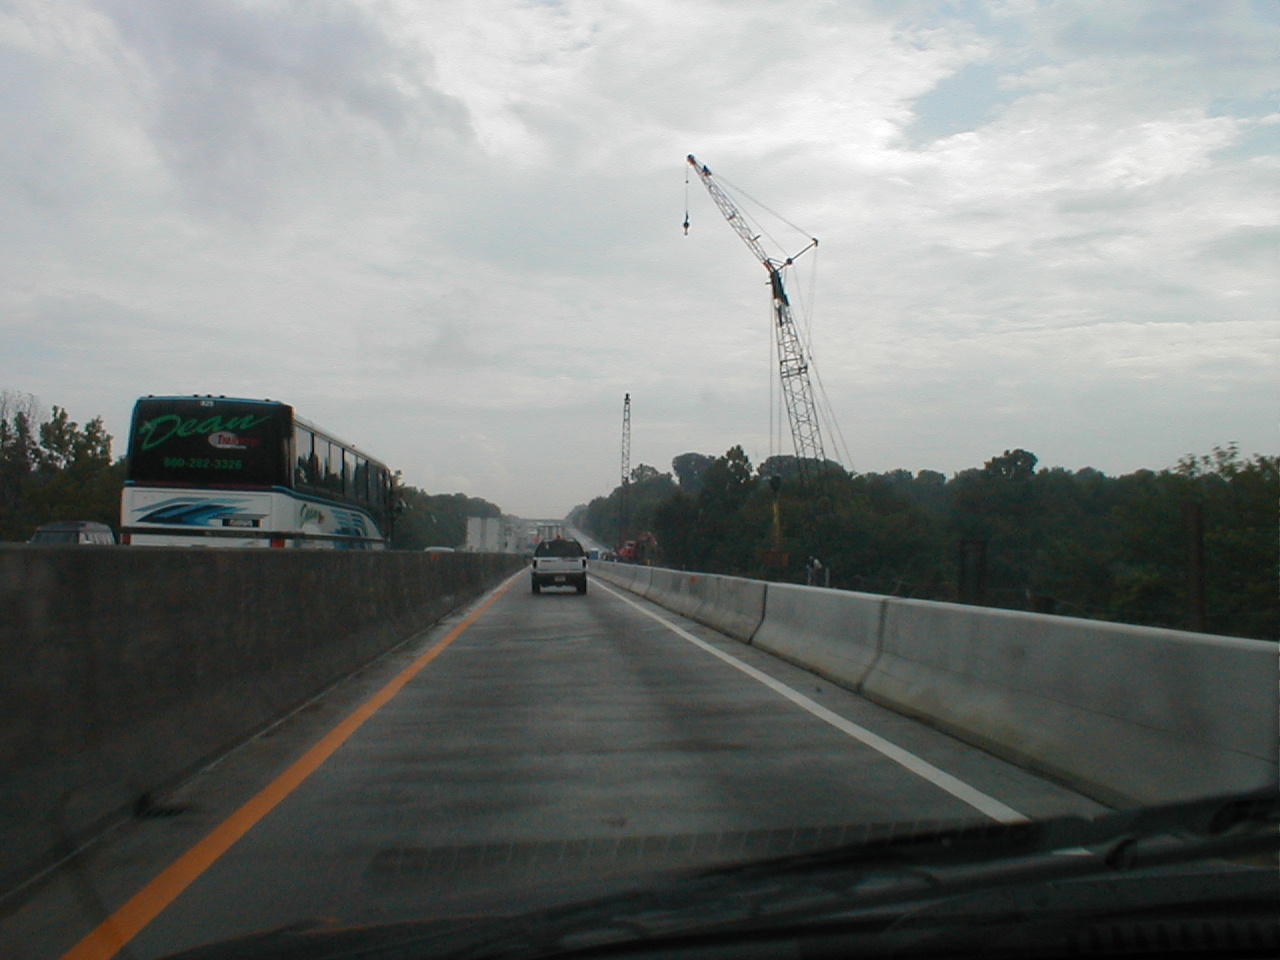 In the right lane of traffic during the unusual traffic split on a bridge over the Barren River.